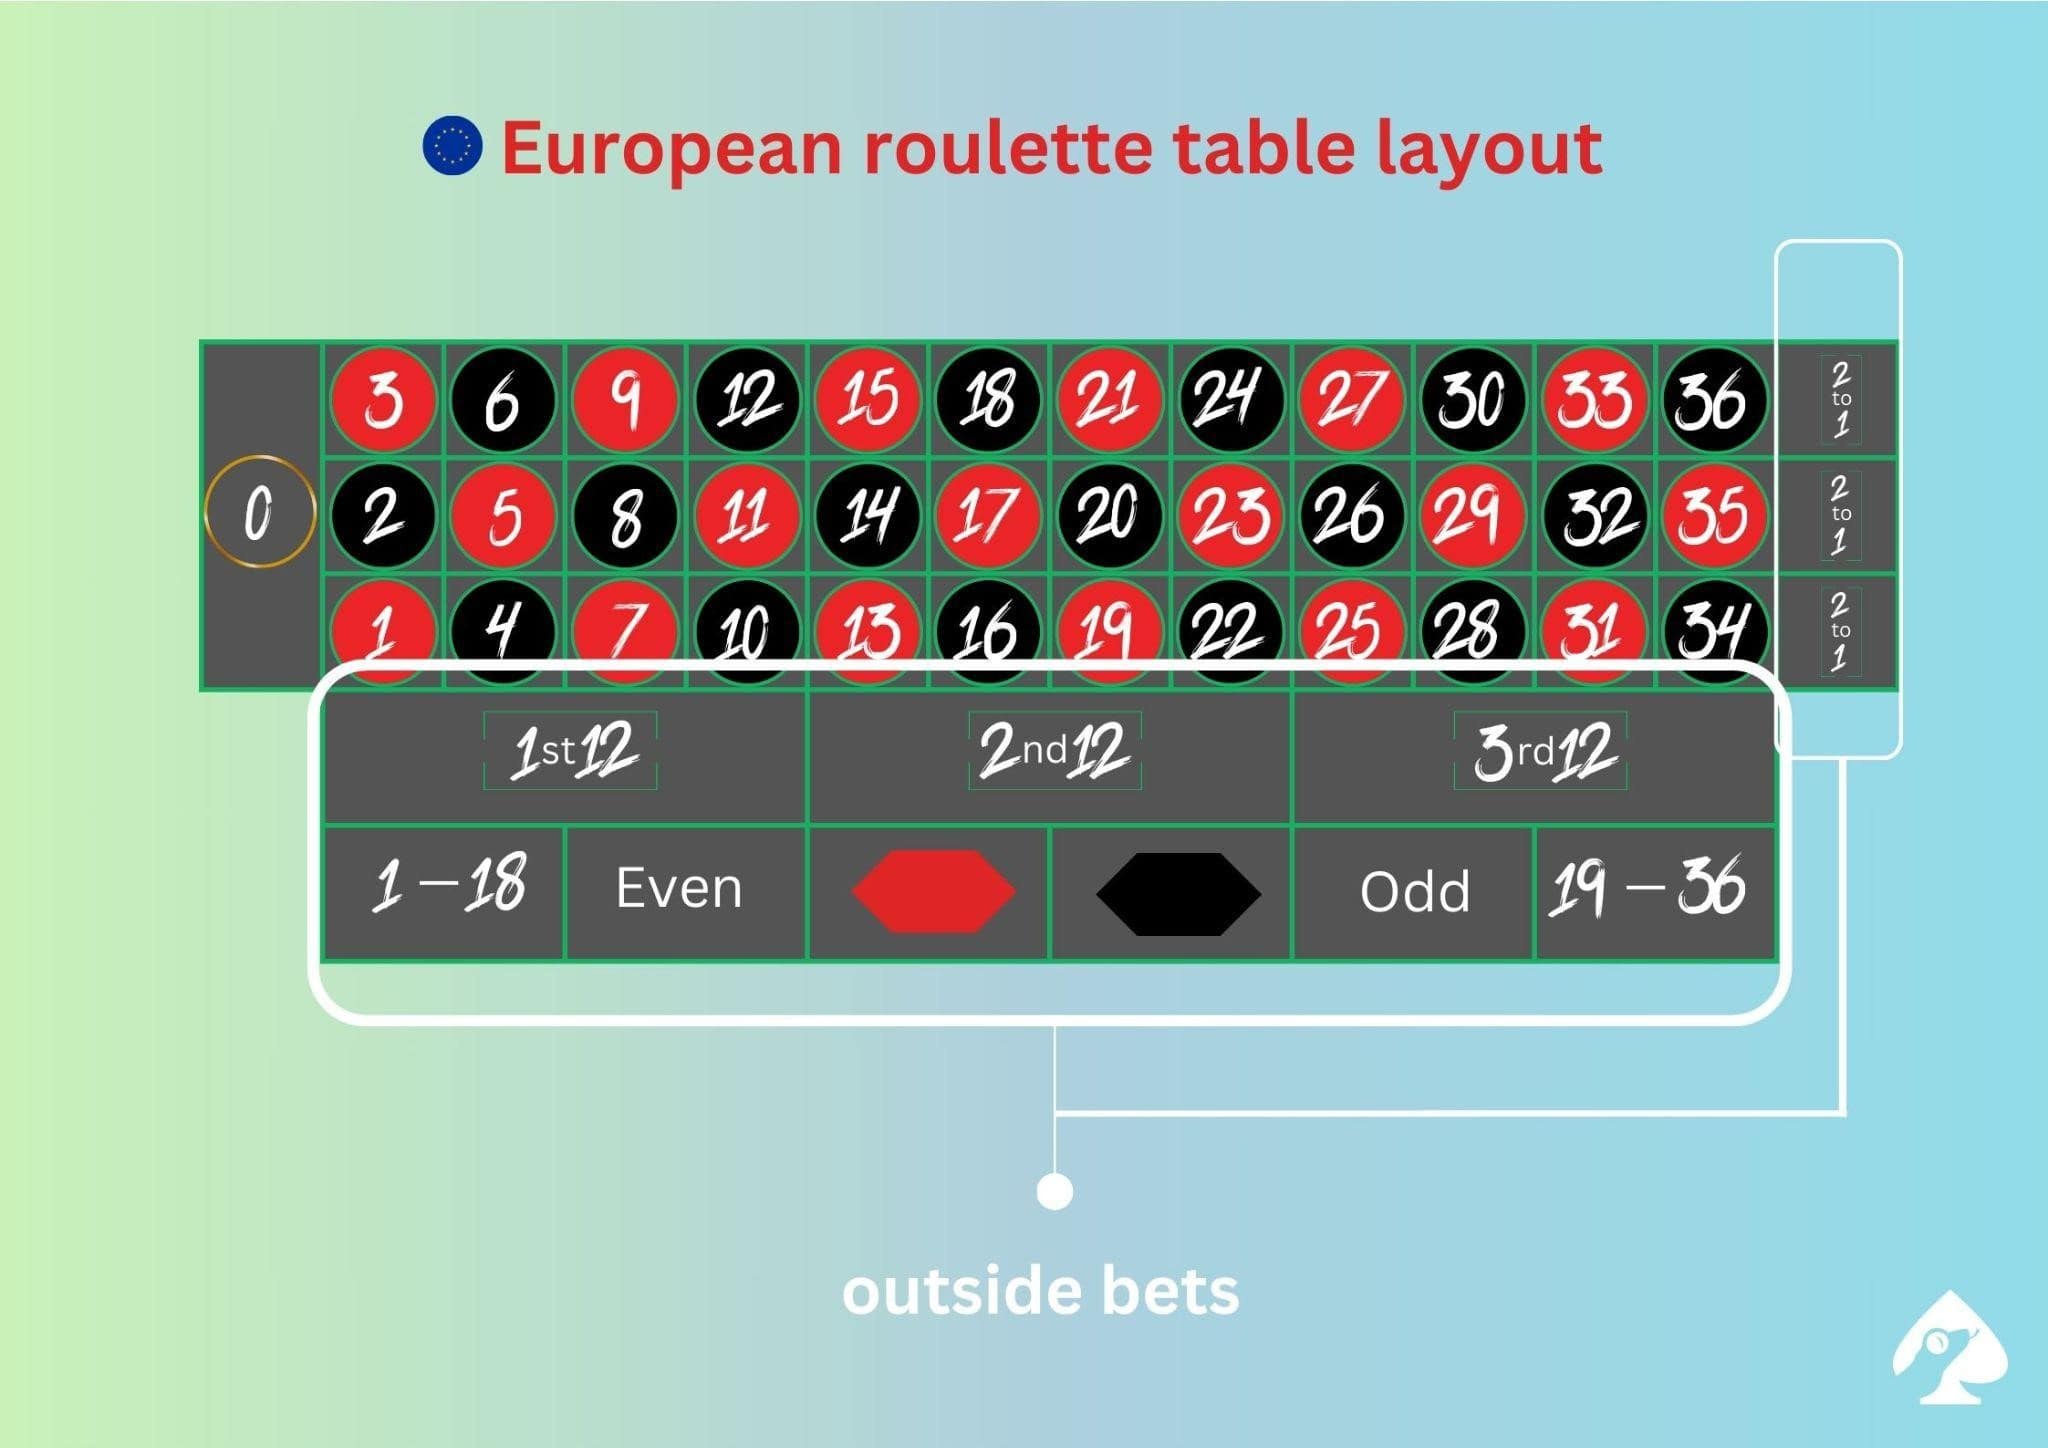 Roulette outside bets layout